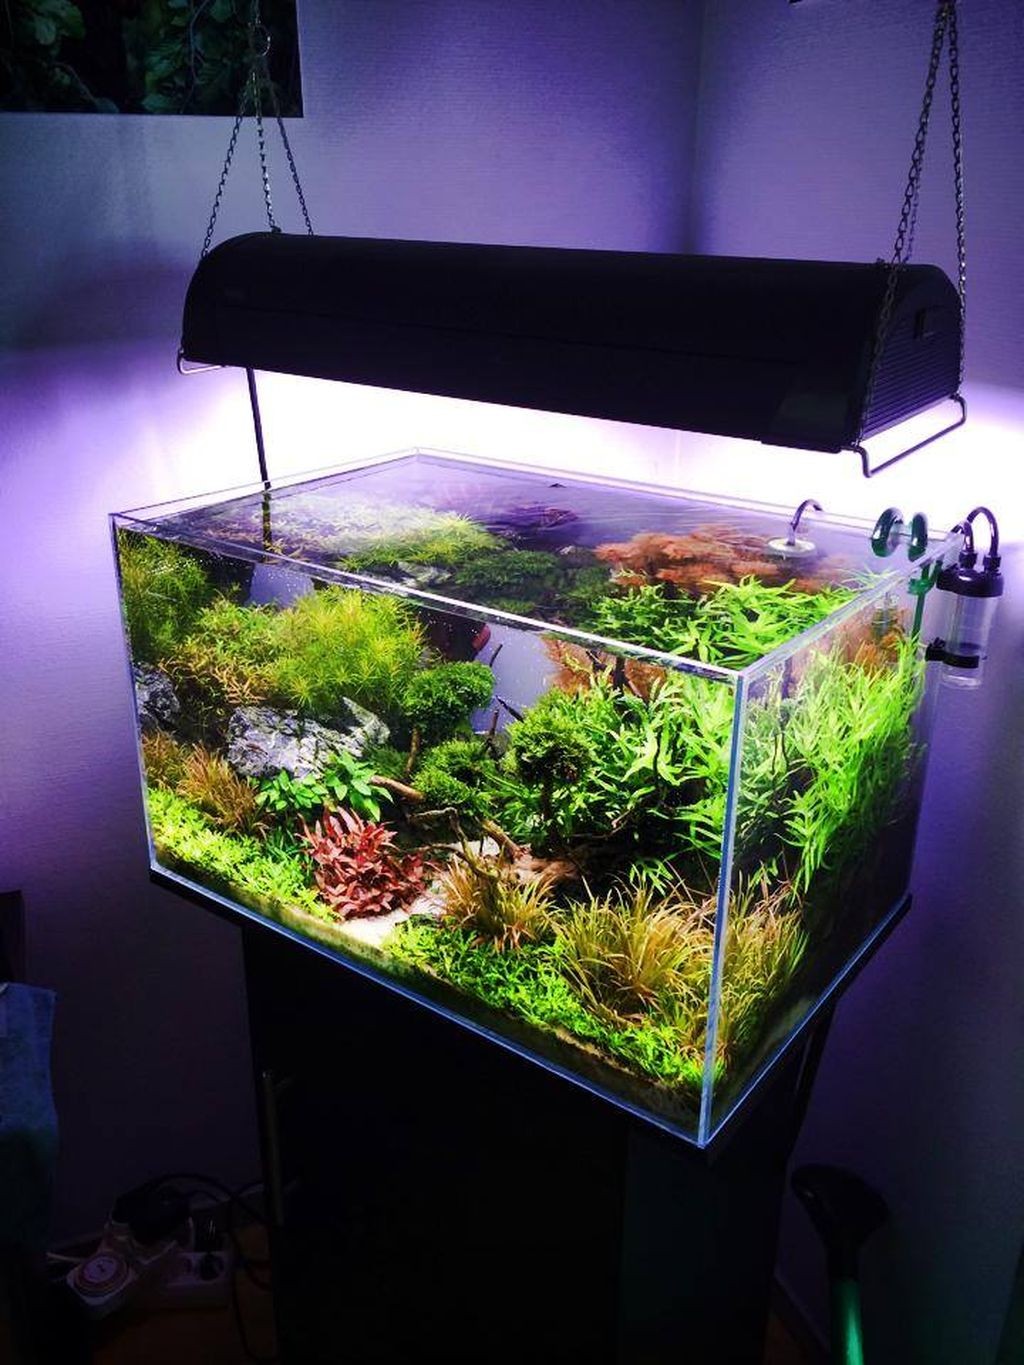 30 Amazing Aquascaping Ideas You Will Totally Love - Page 27 of 30